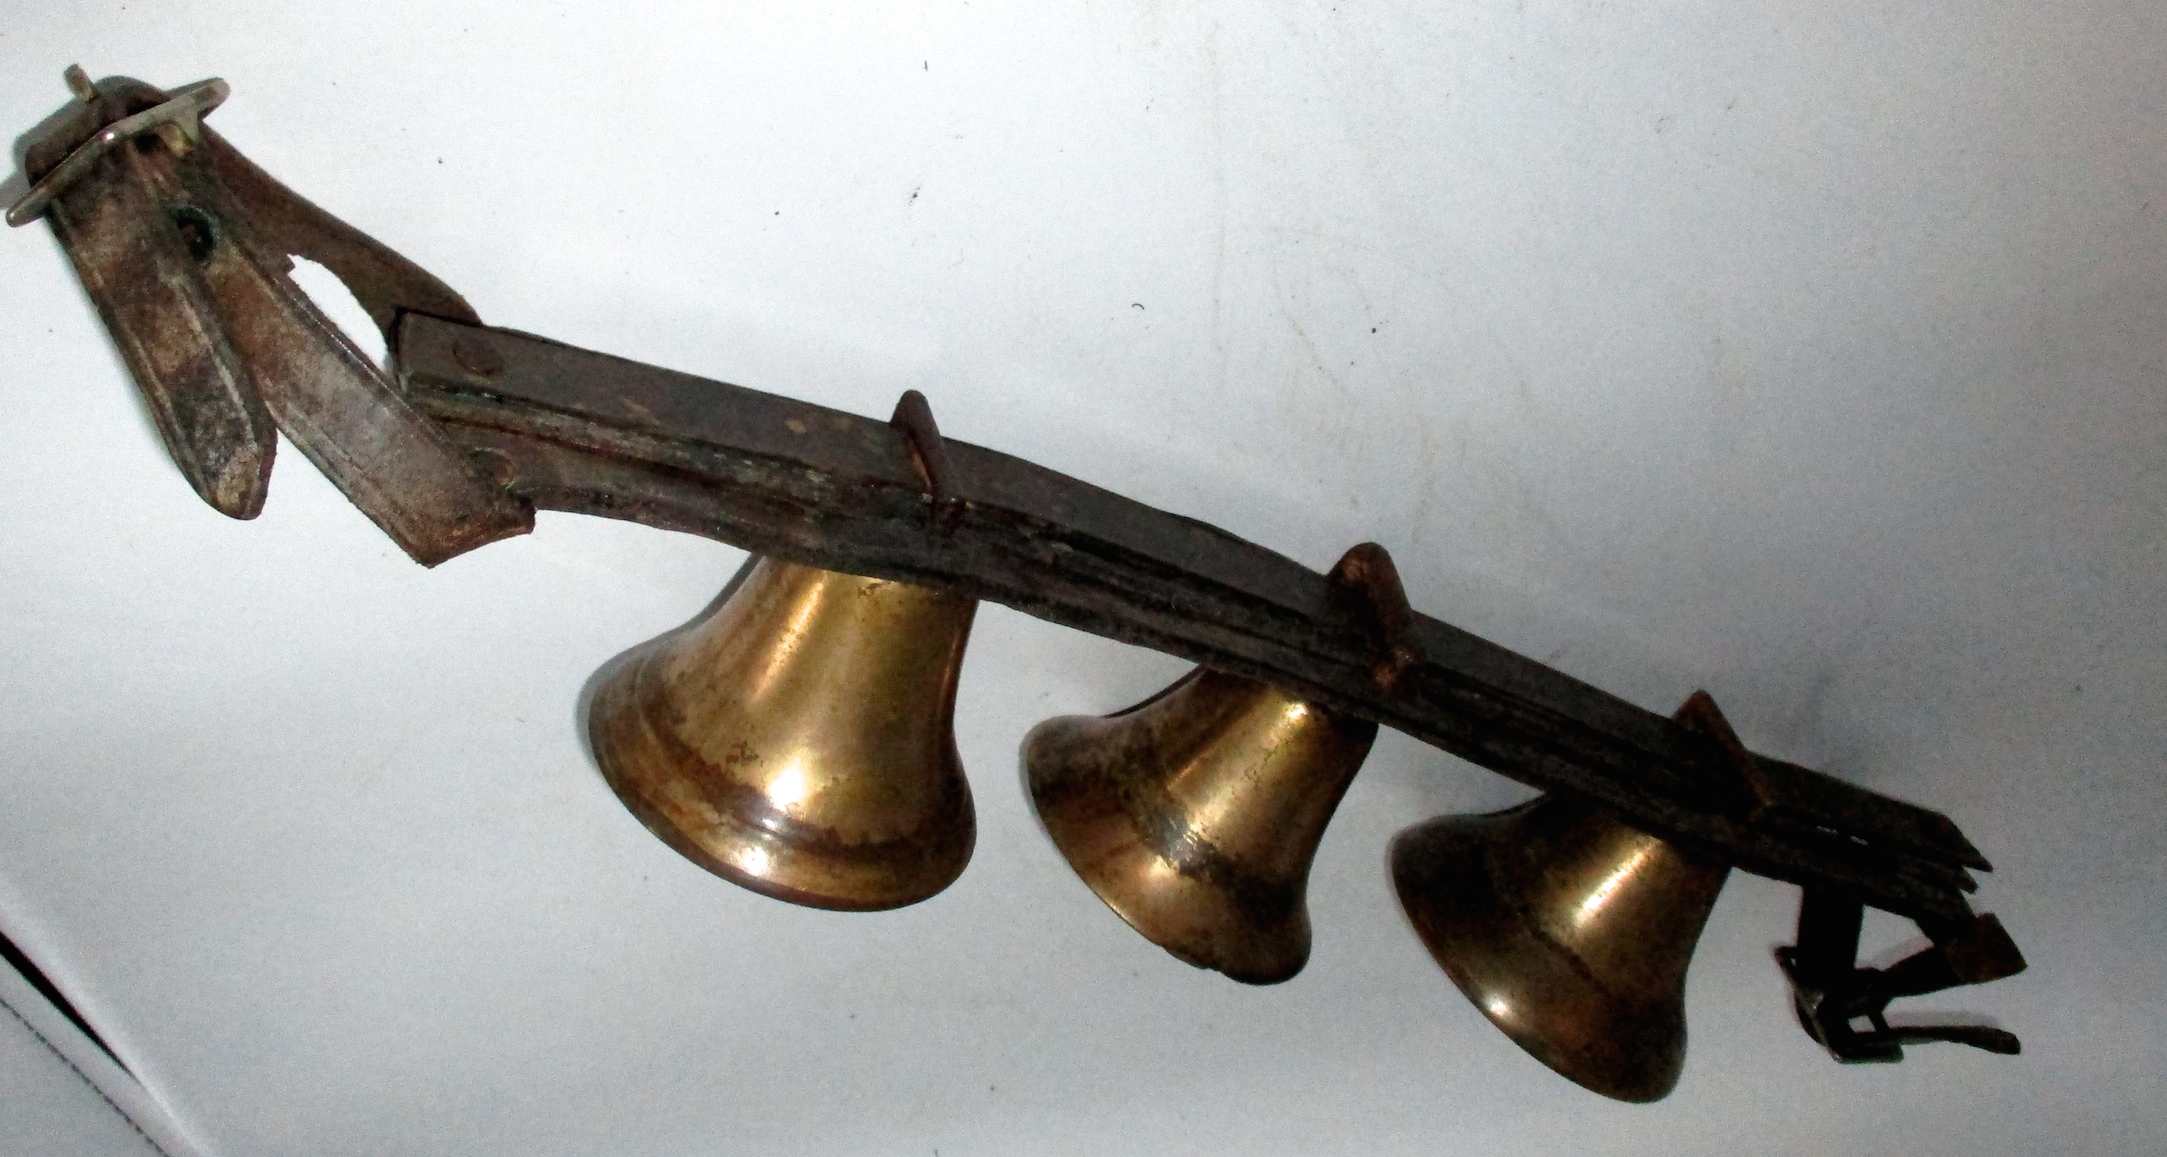 Set of 3 Wagon Bells on a Leather Strap